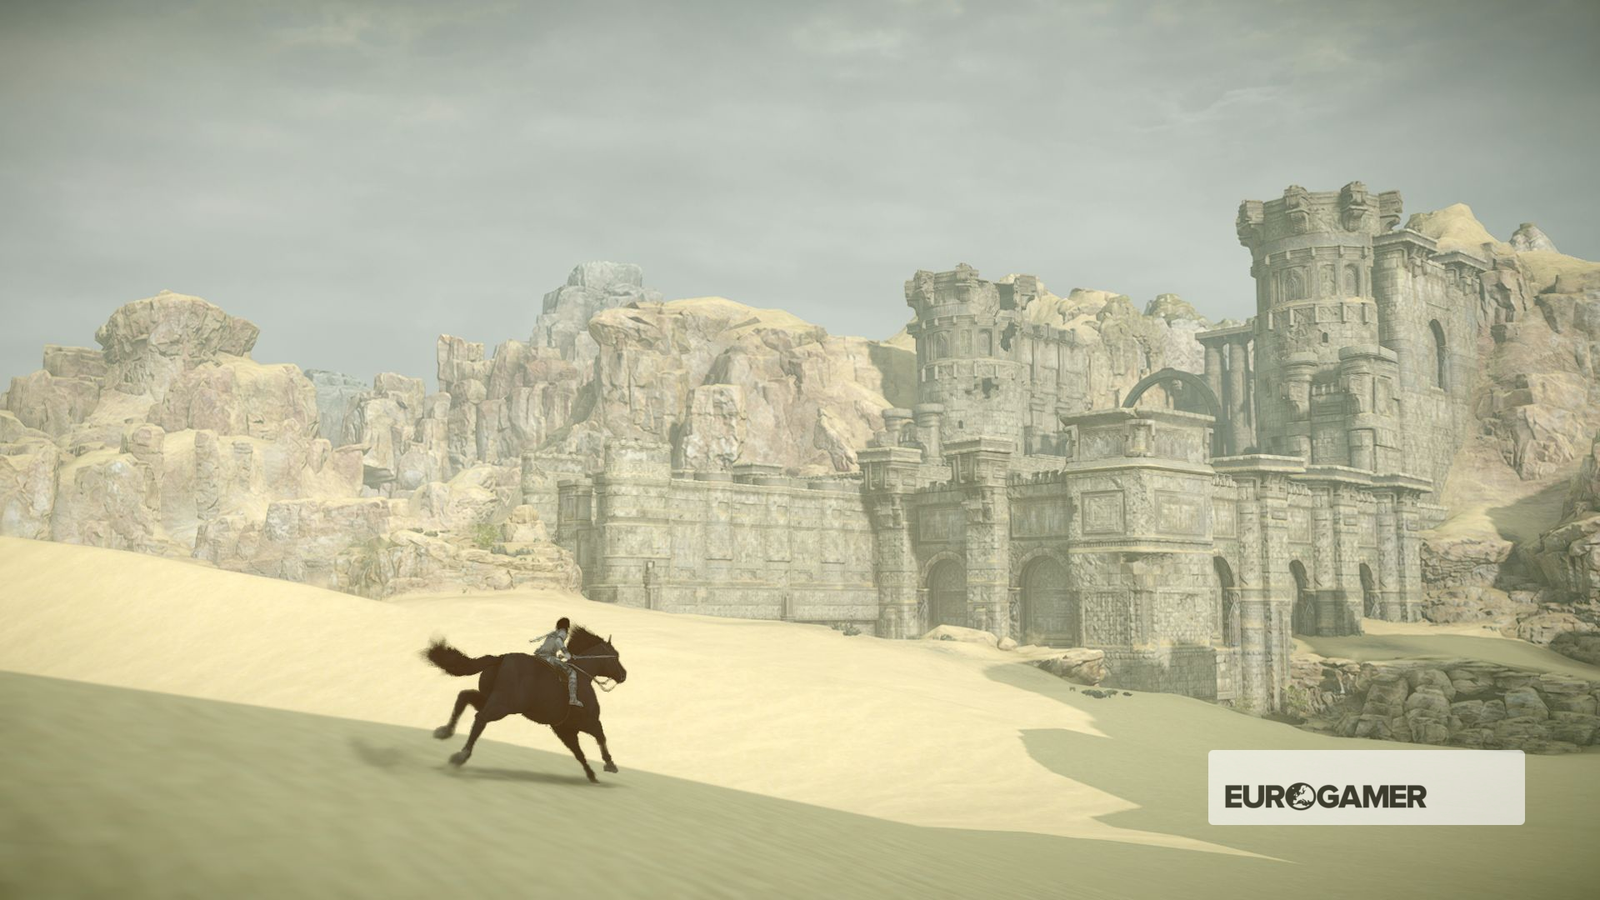 SONY COMPUTER ENTERTAINMENT Shadow of the Colossus - PS4